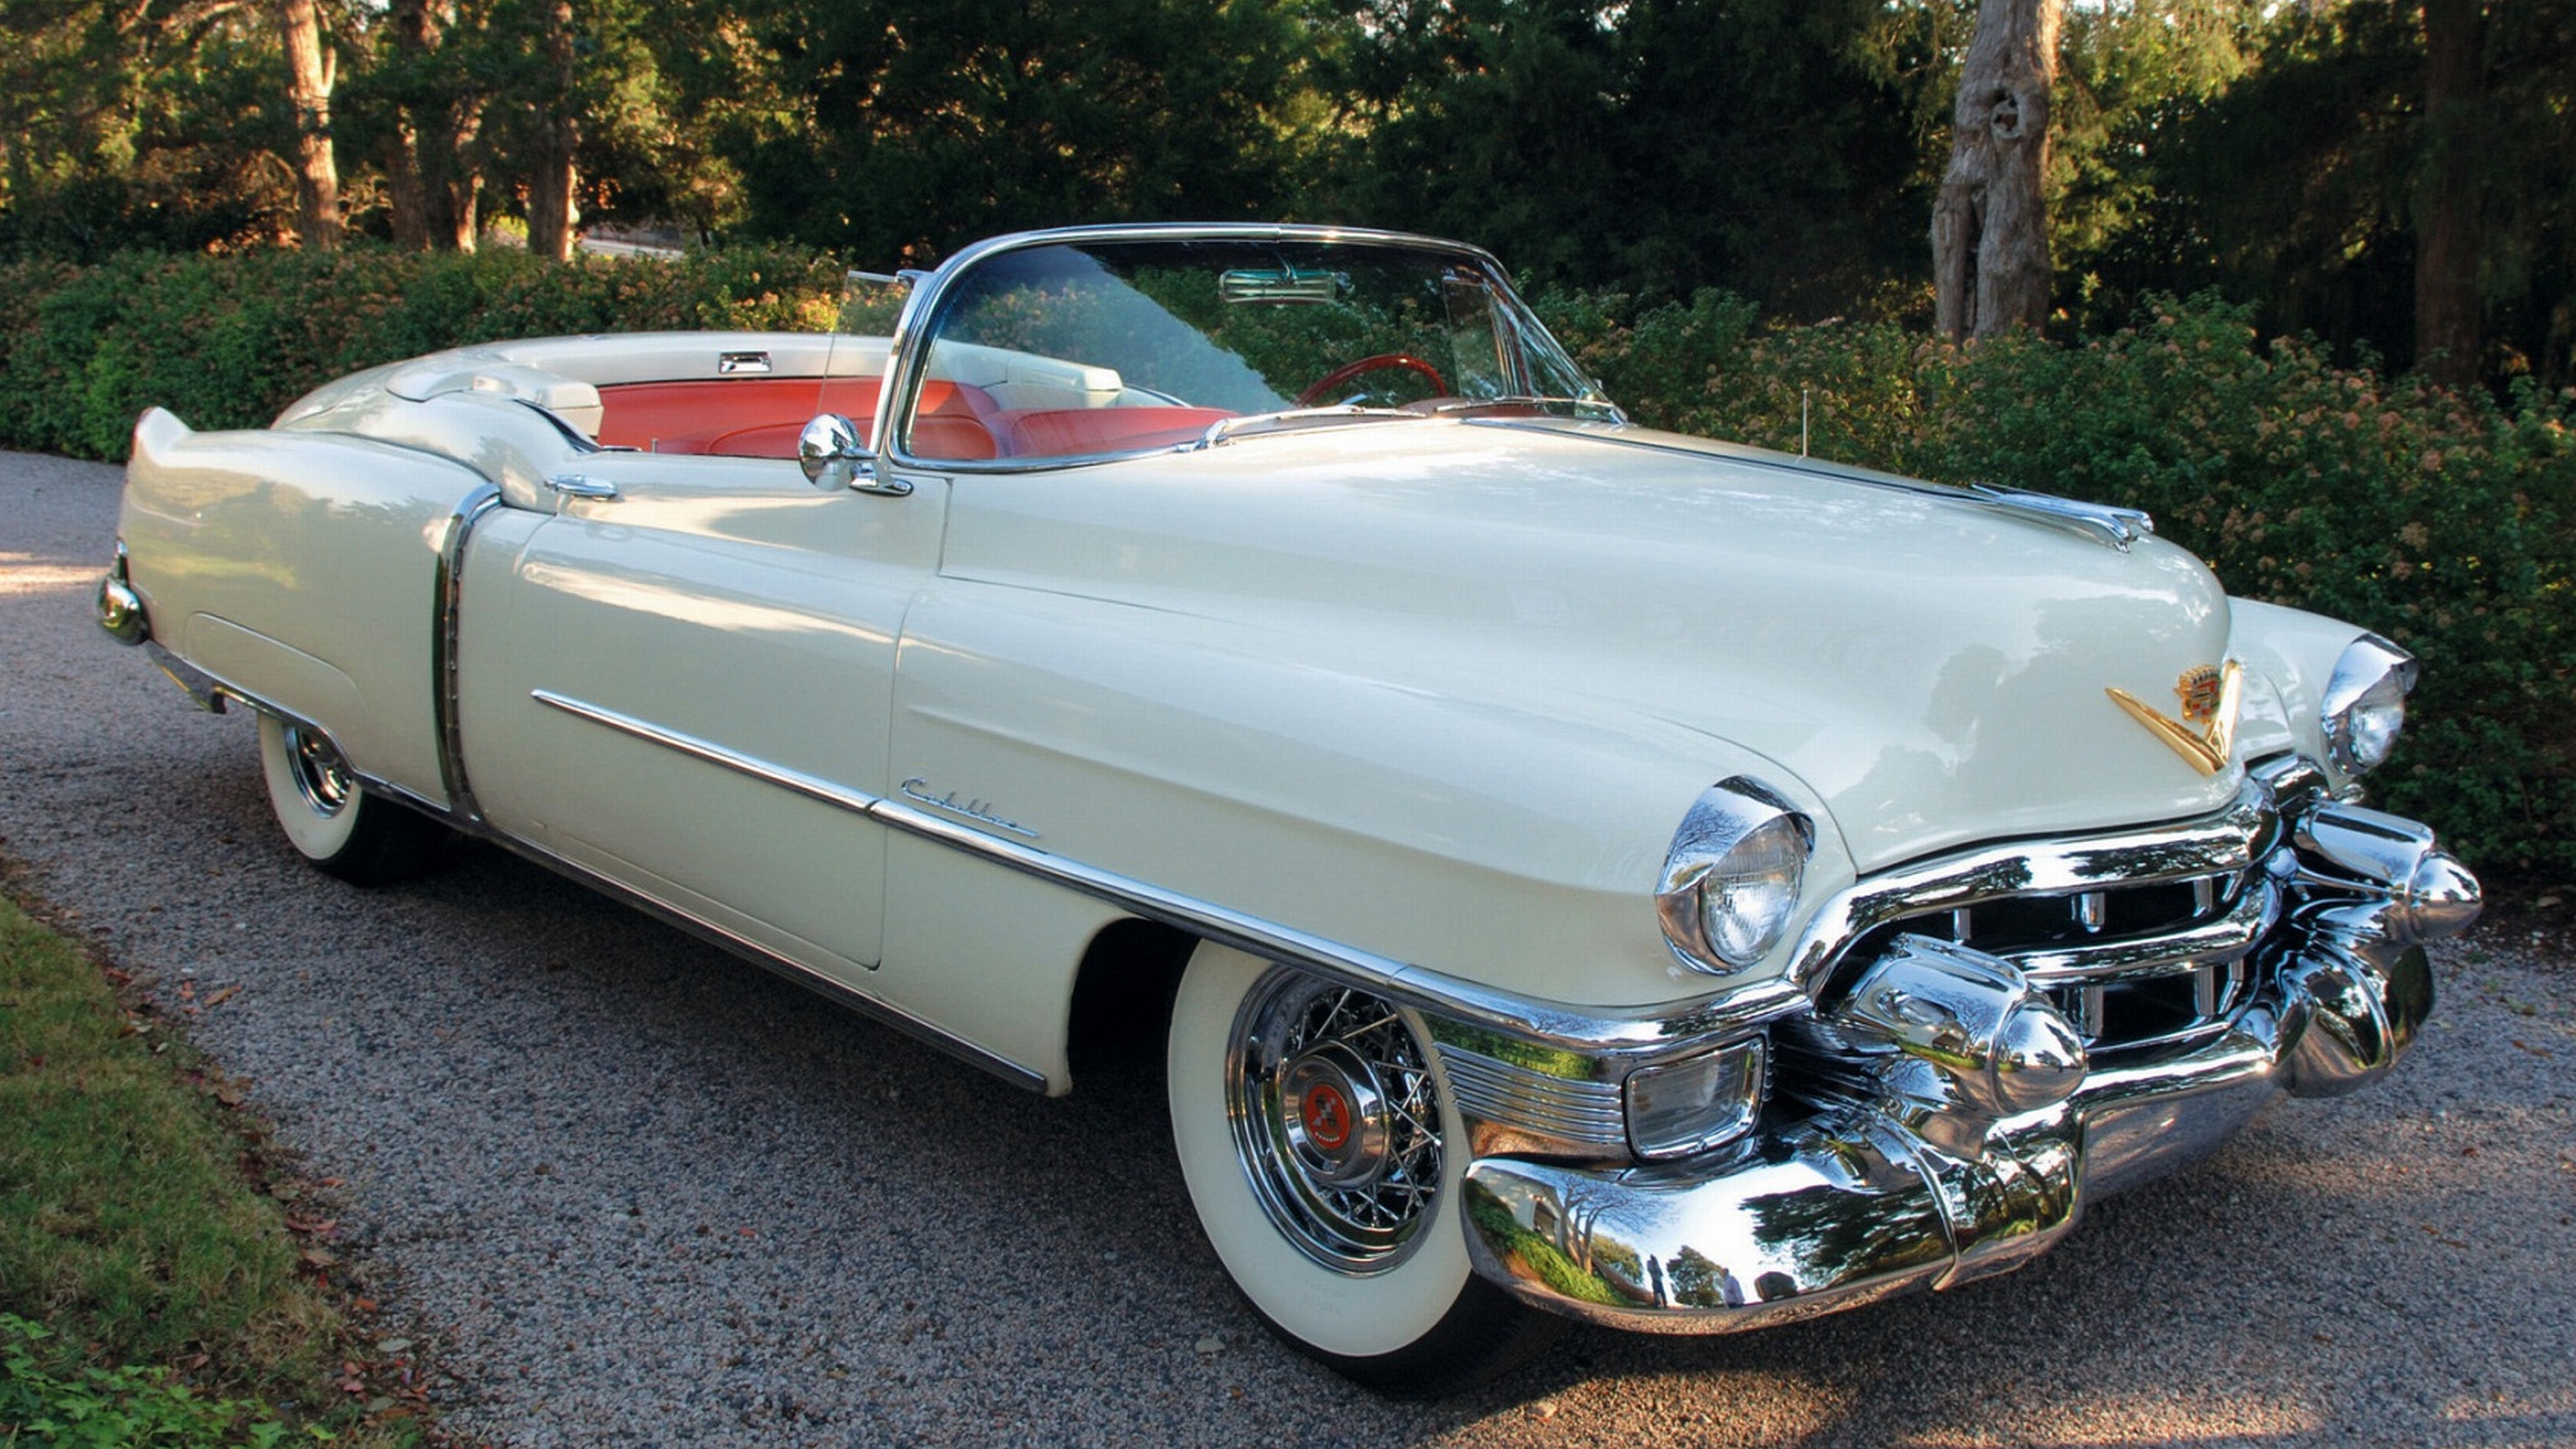 Vintage Cadillac convertible displayed in high-quality 4K ultra HD resolution.